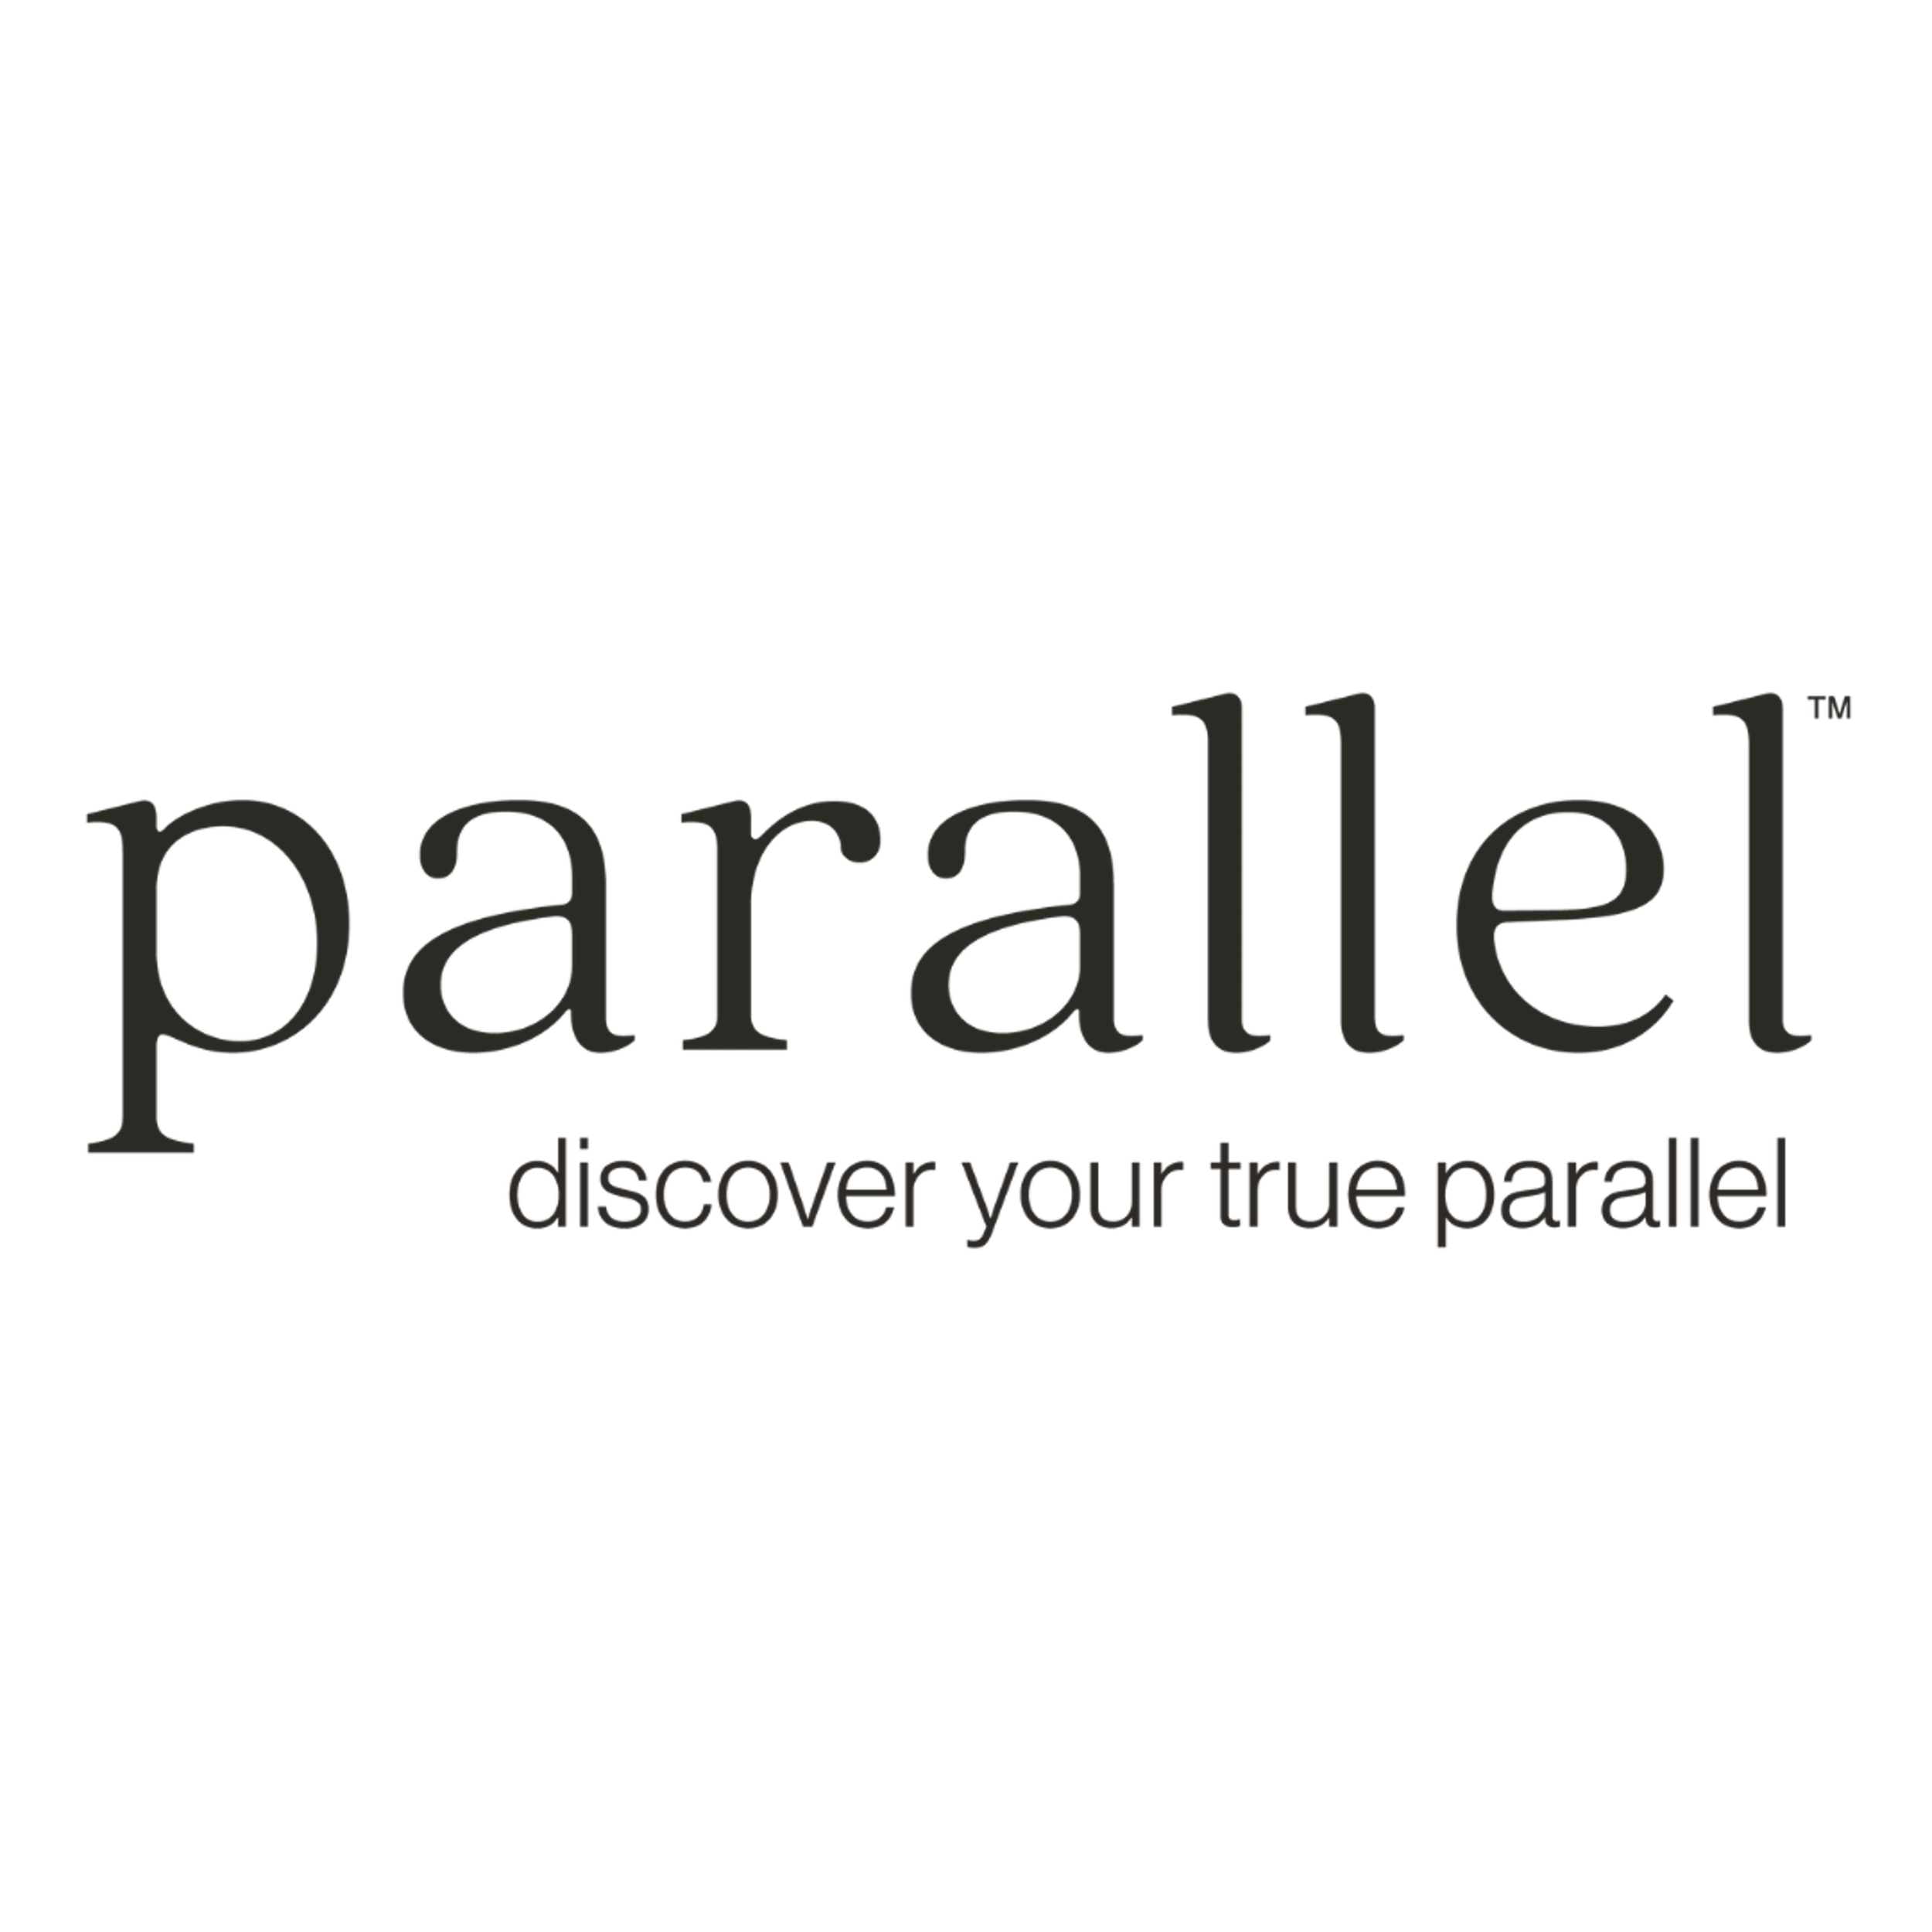 Parallel Logo 1080x1080 (2).png